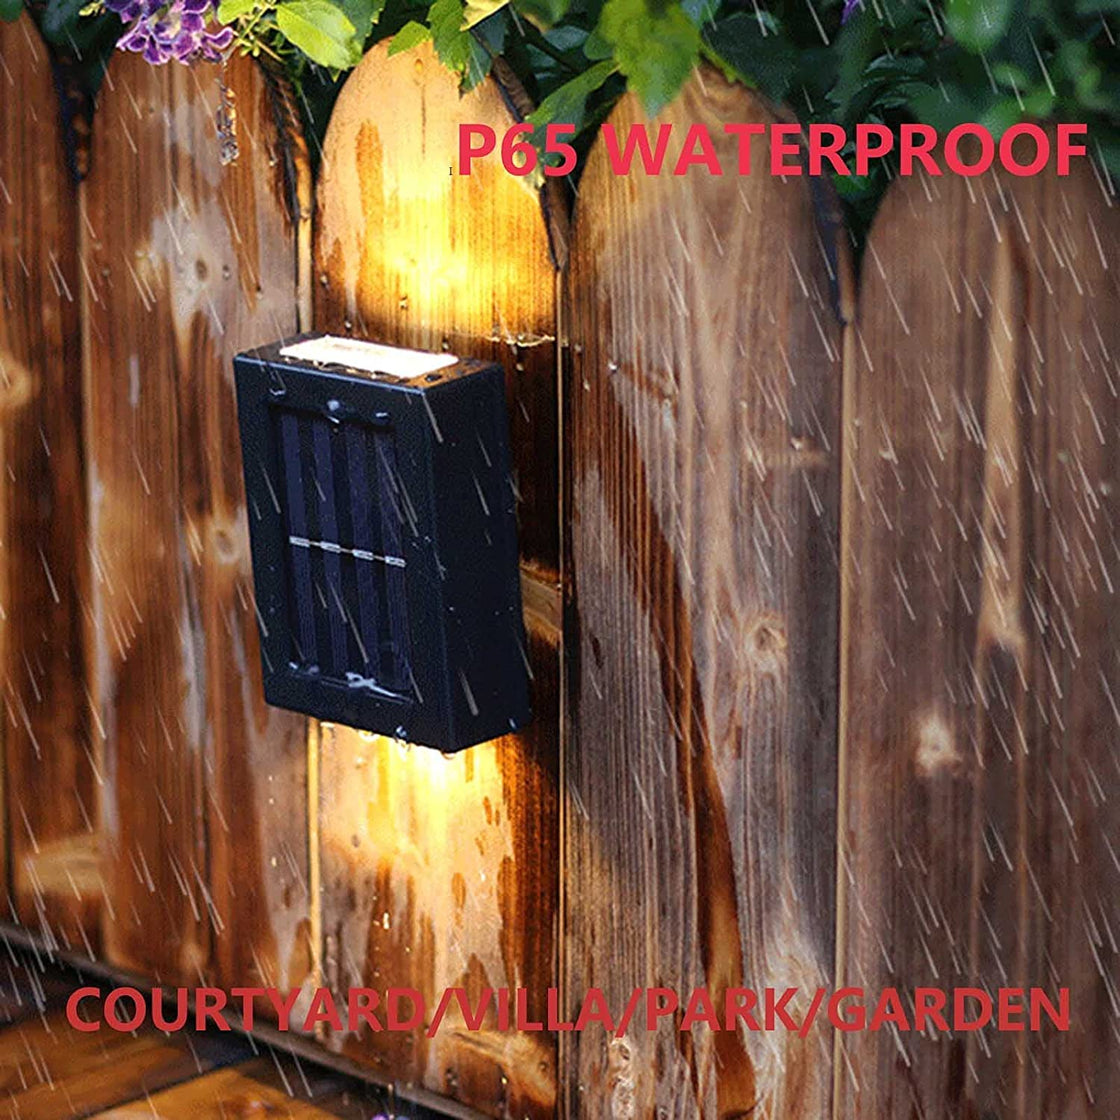 Solar Wall Lights Small Fence Waterproof Lights Solar Powered, Up Down LED Porch Light, Luces Solares para Exteriores